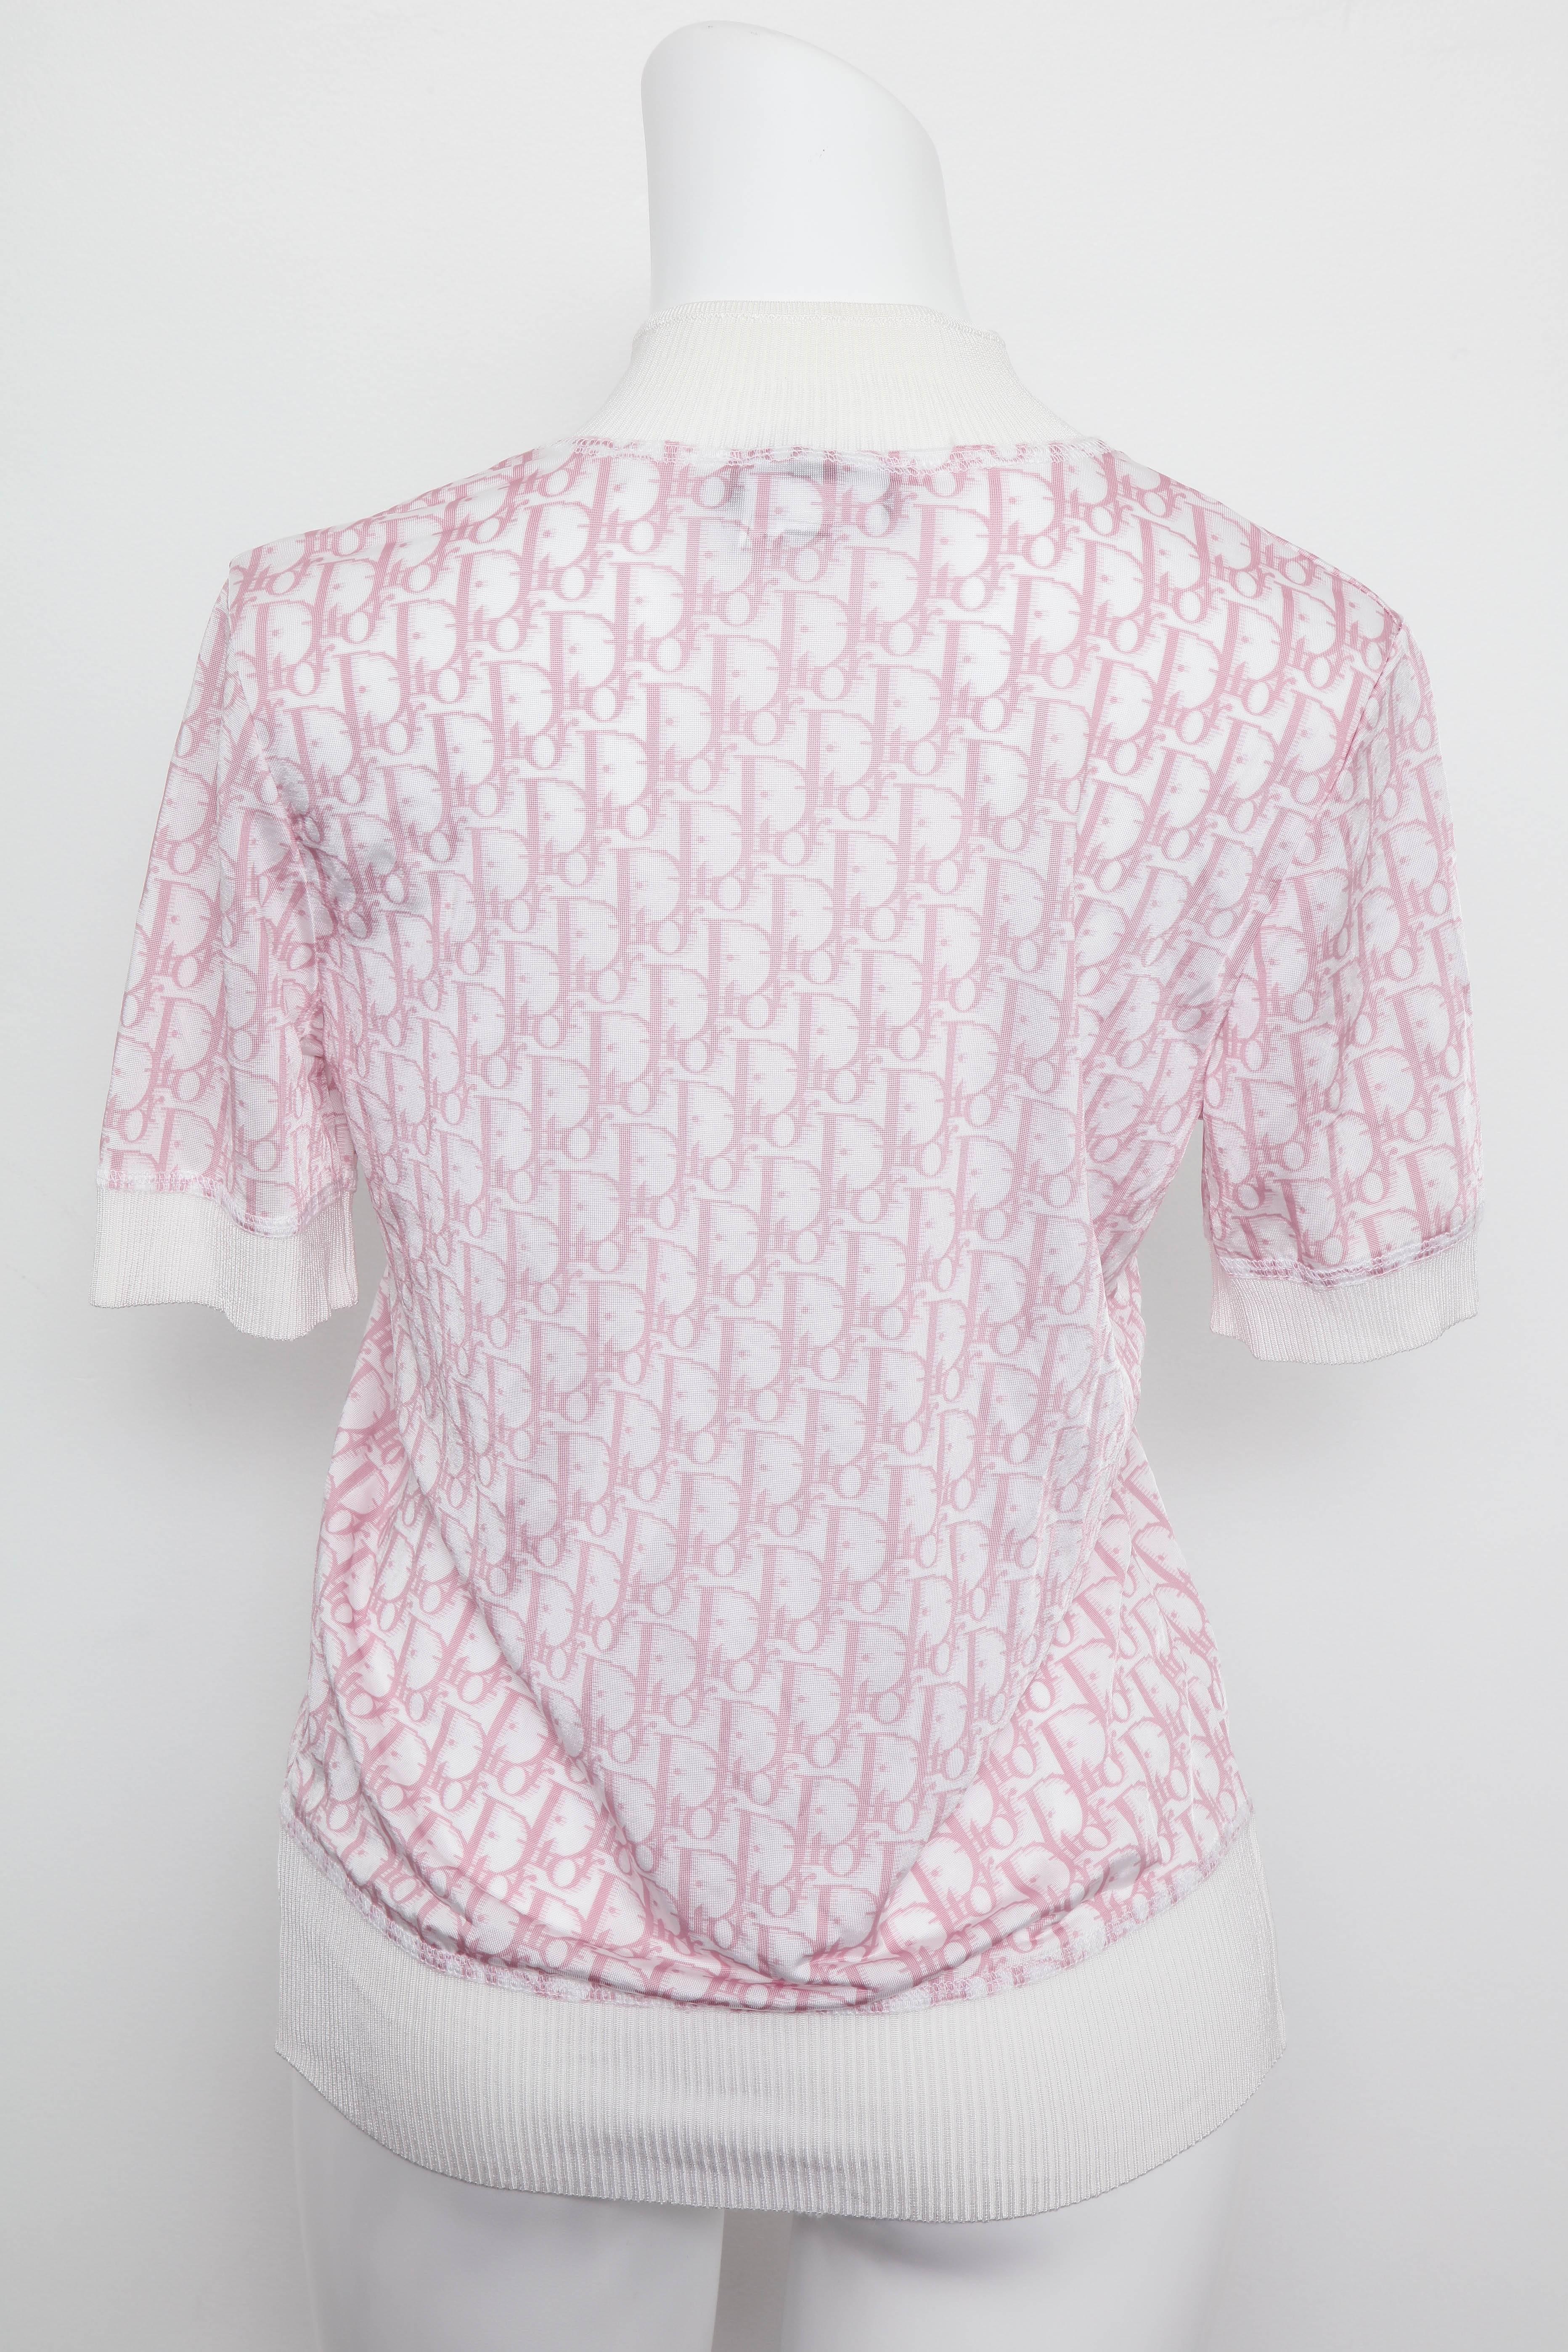 Gray John Galliano for Christian Dior Pink Trotter Logo Shirt For Sale